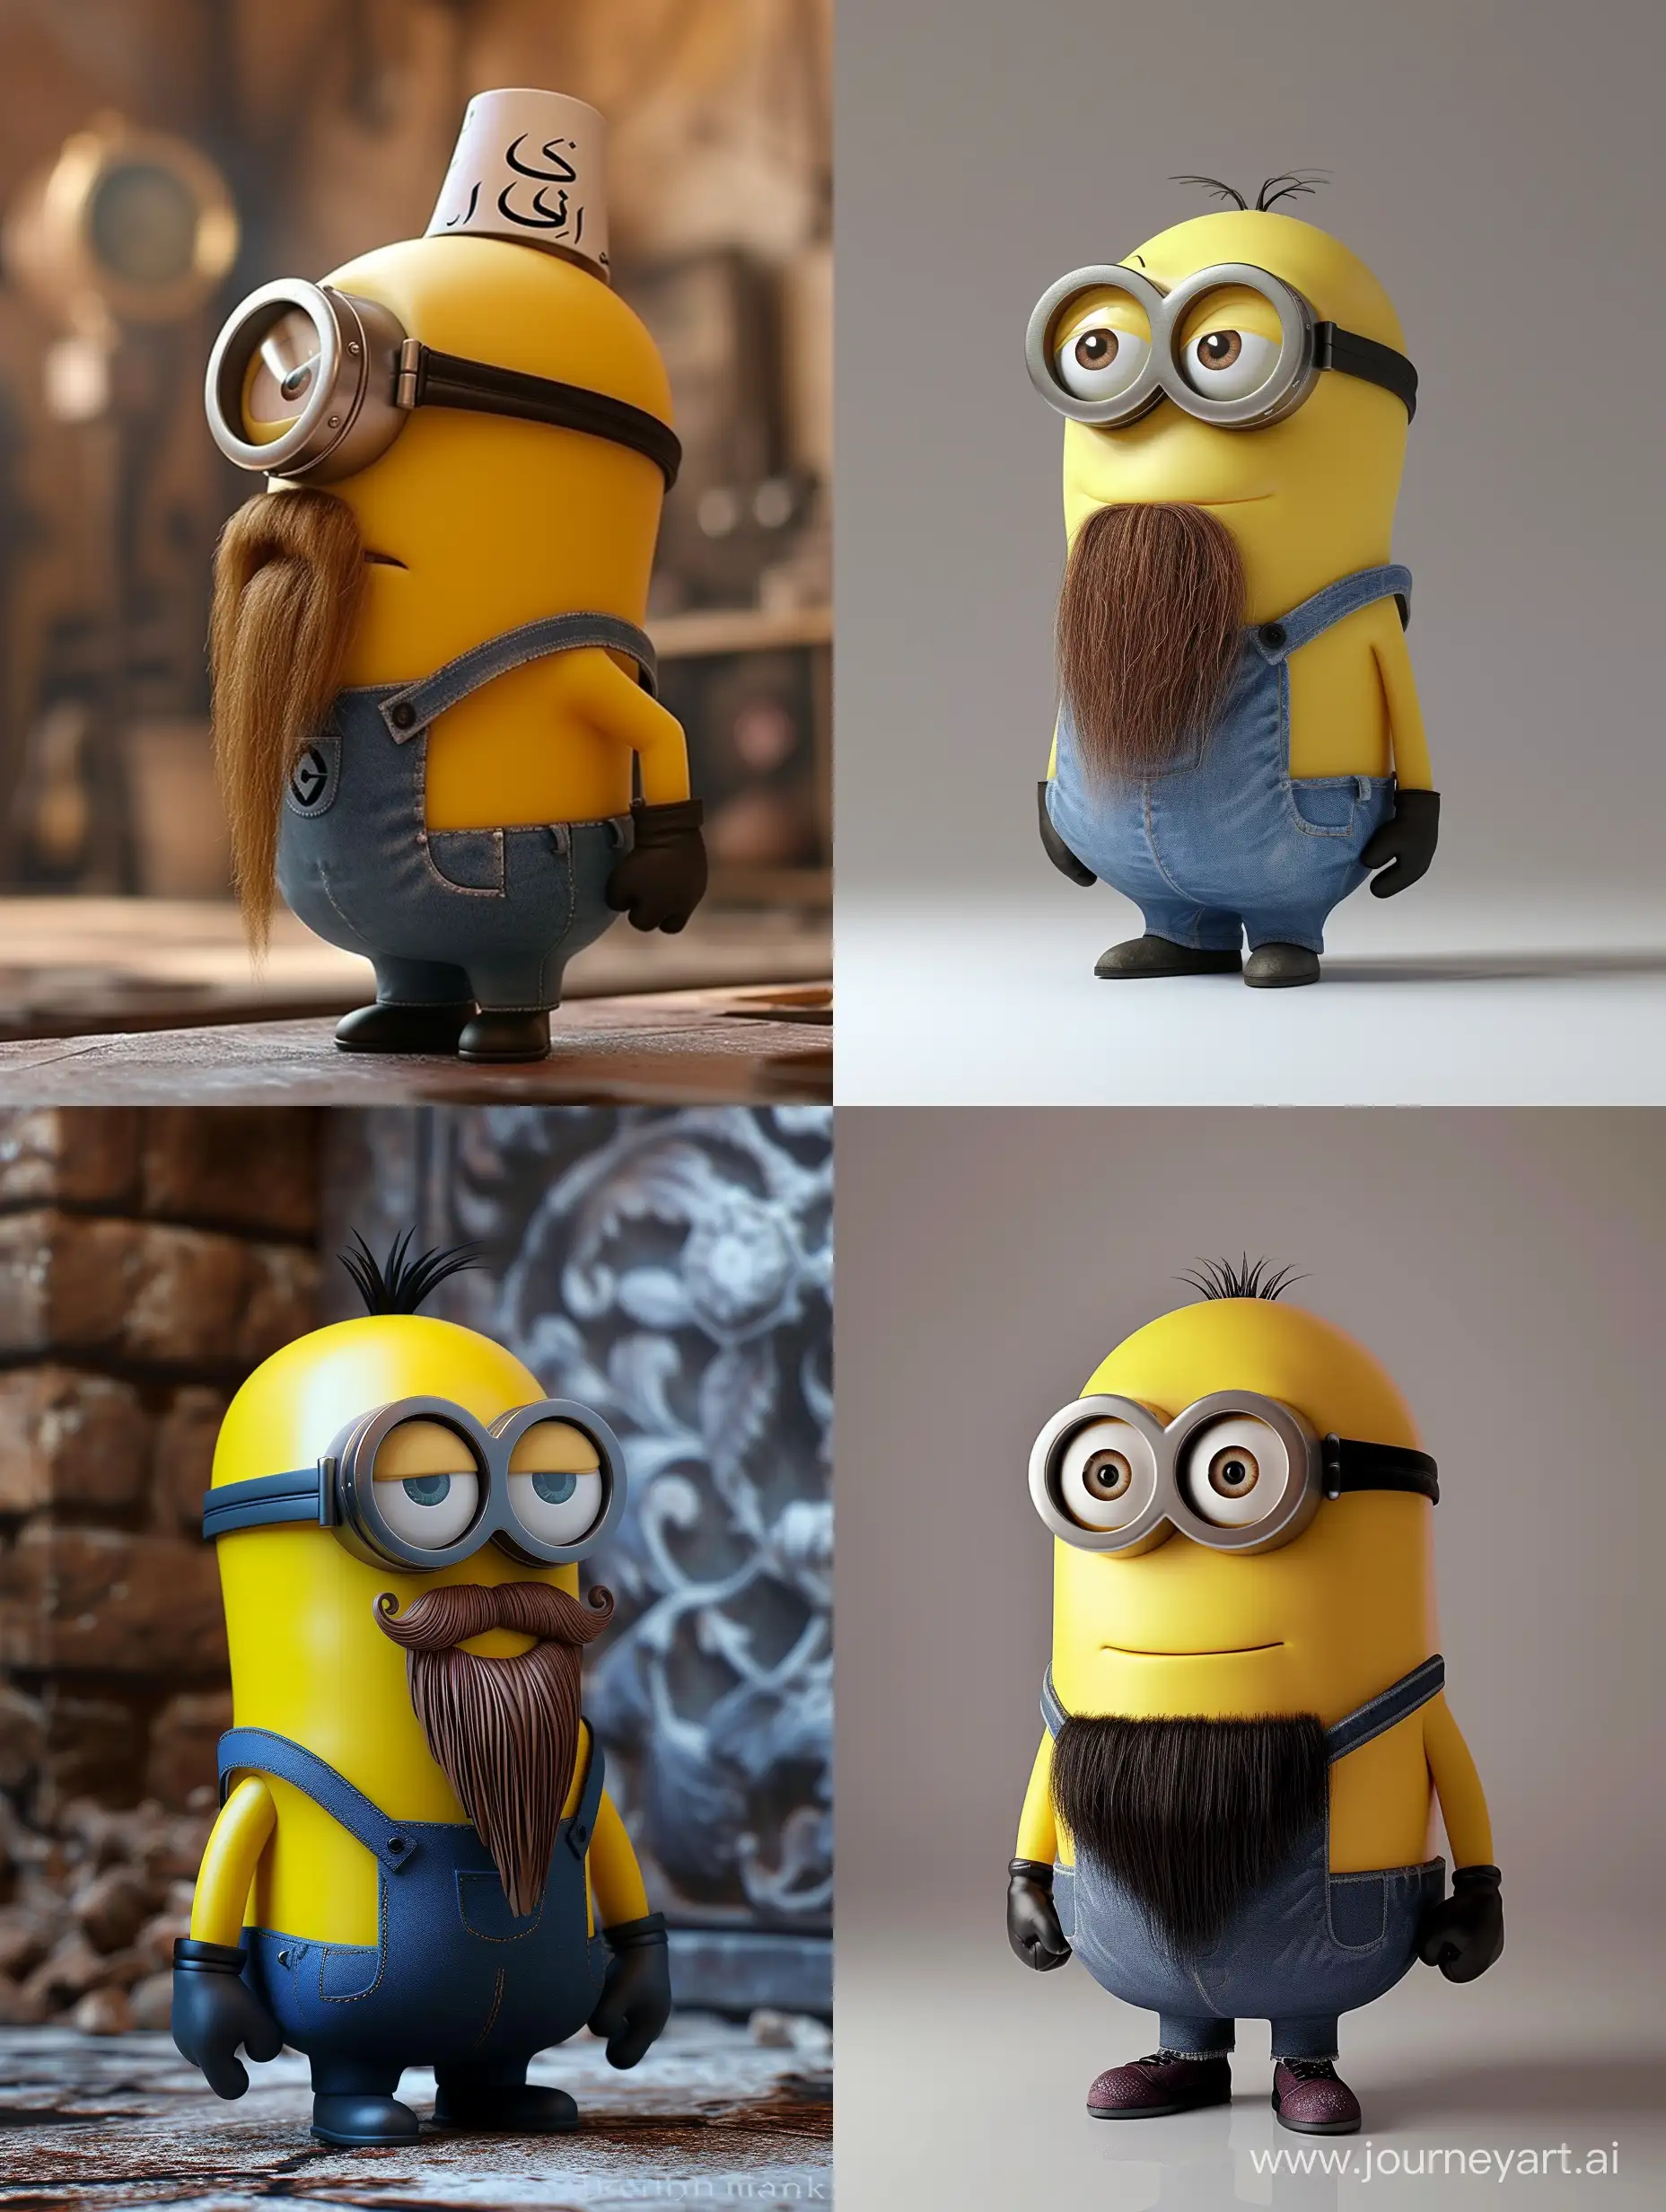 The muscular yellow minion from the cartoon "despicable me" is a Muslim minion with a beard,photo, detailed